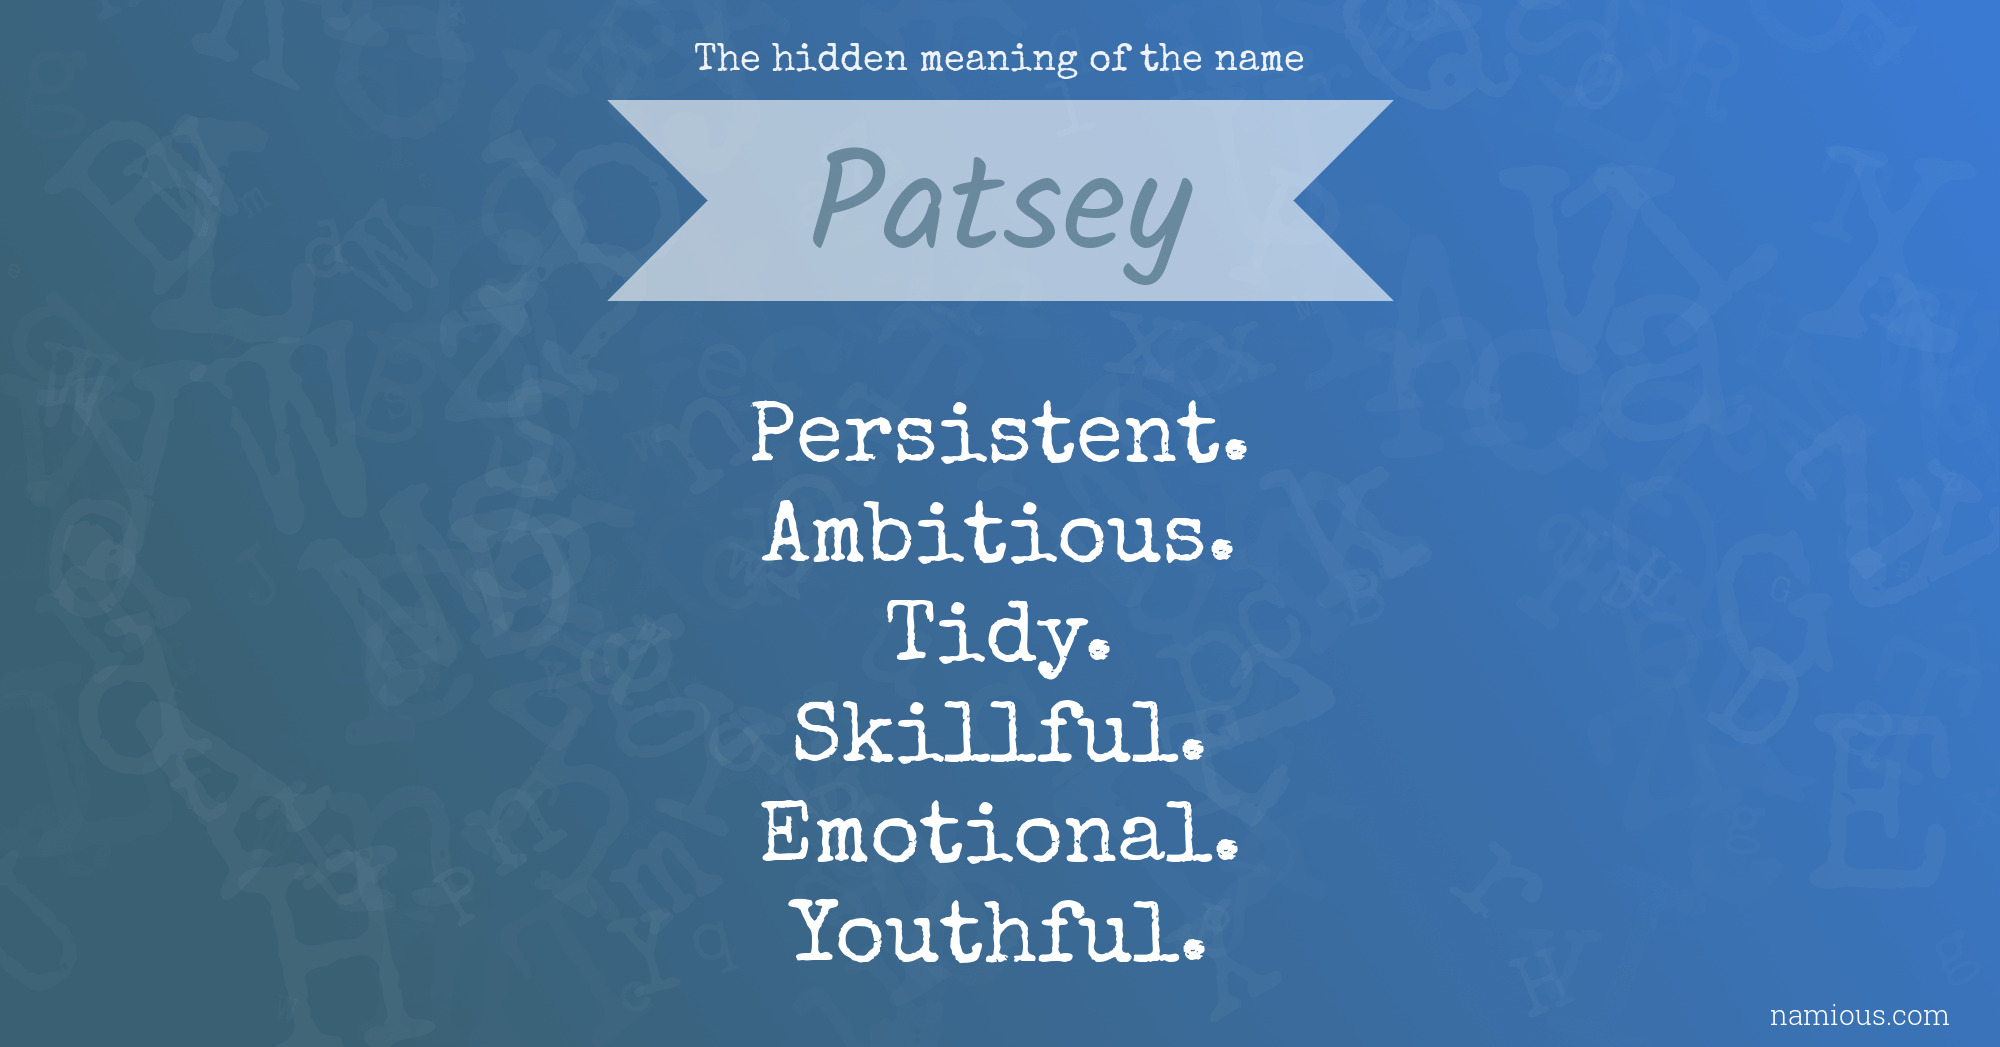 The hidden meaning of the name Patsey